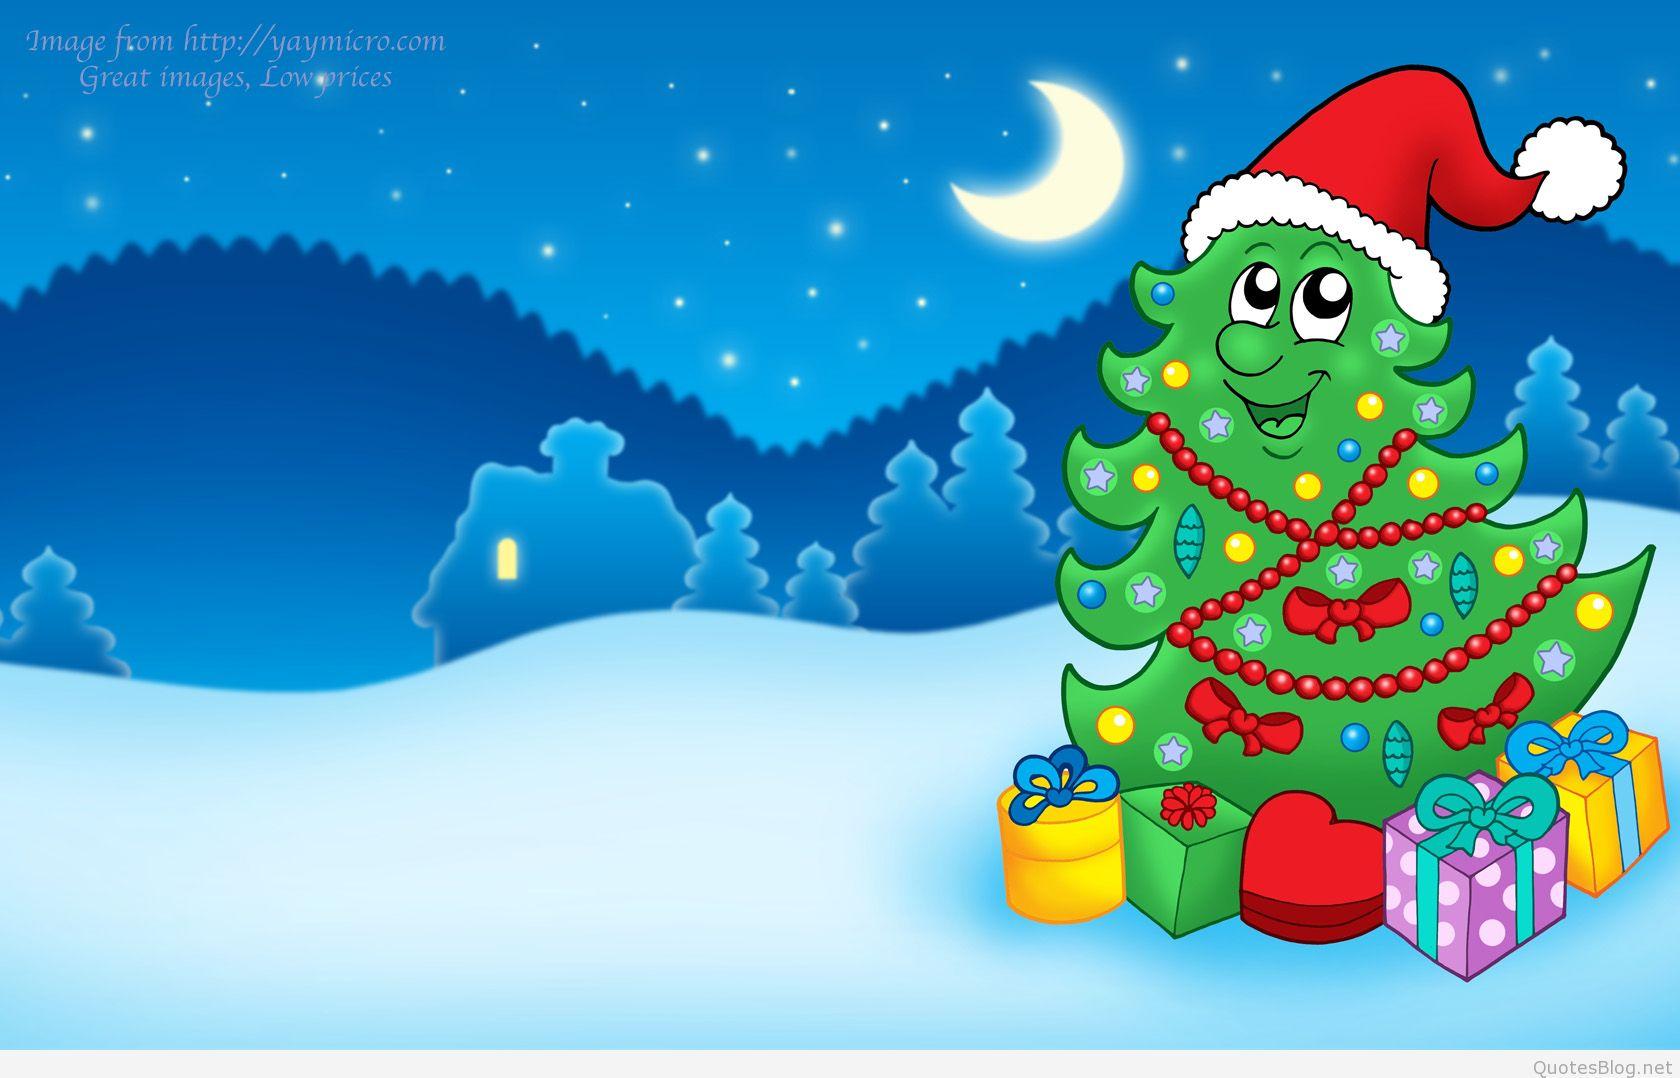 Funny Merry Christmas Cartoons sayings & quotes 2015